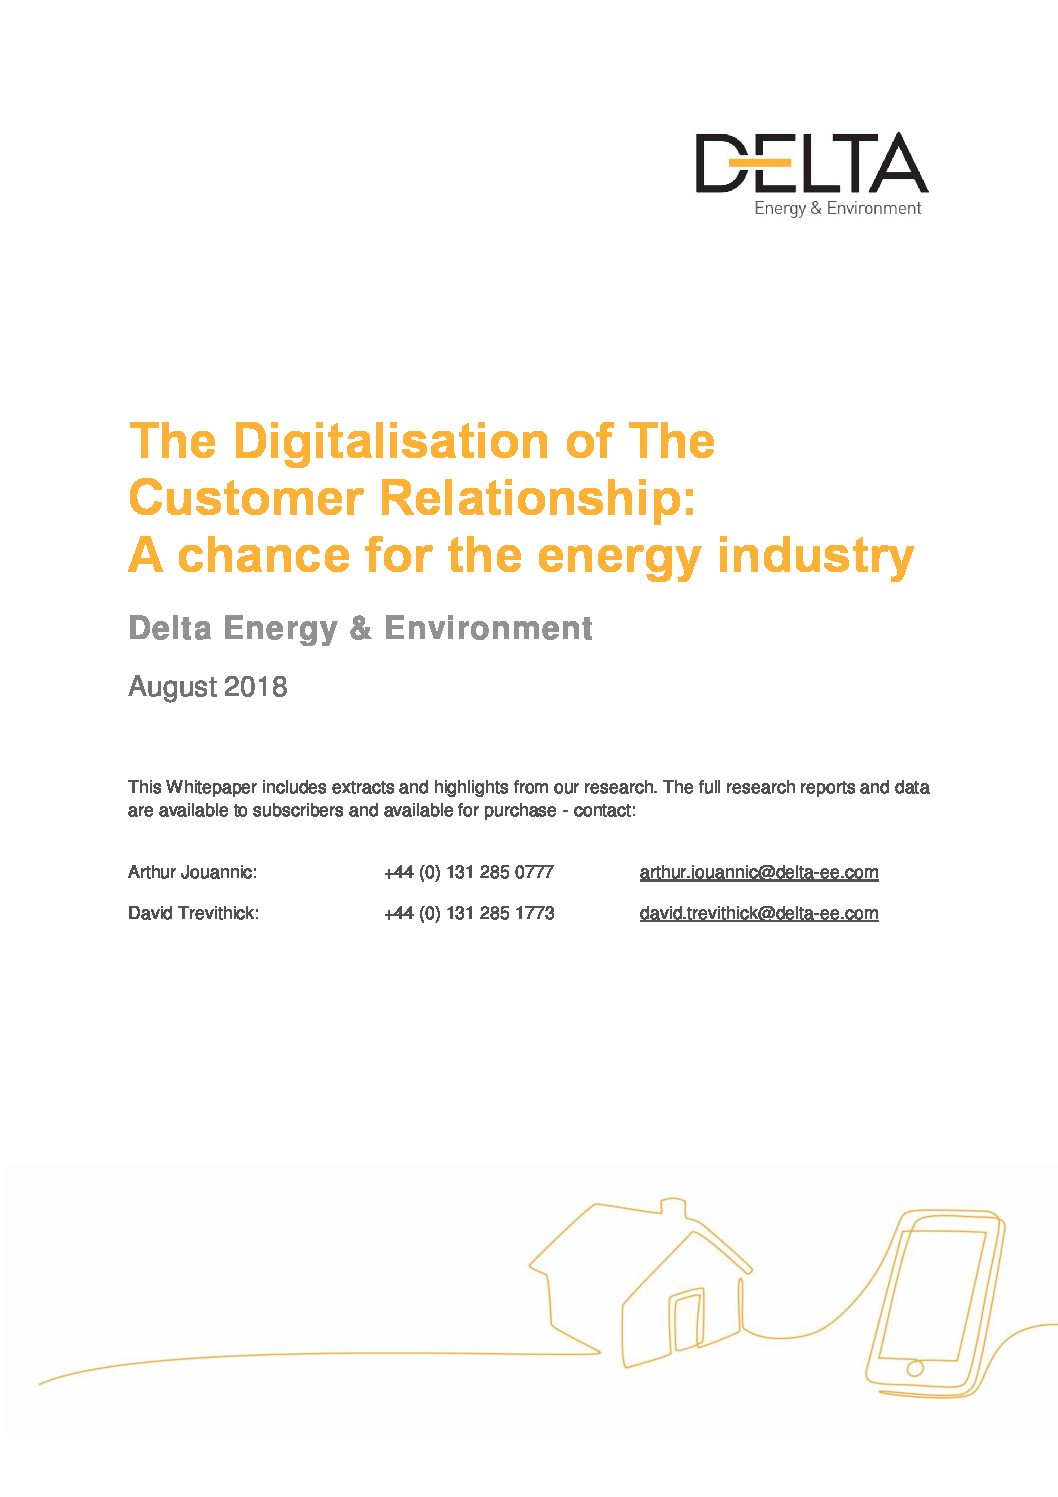 The Digitalisation of The Customer Relationship: A chance for the energy industry